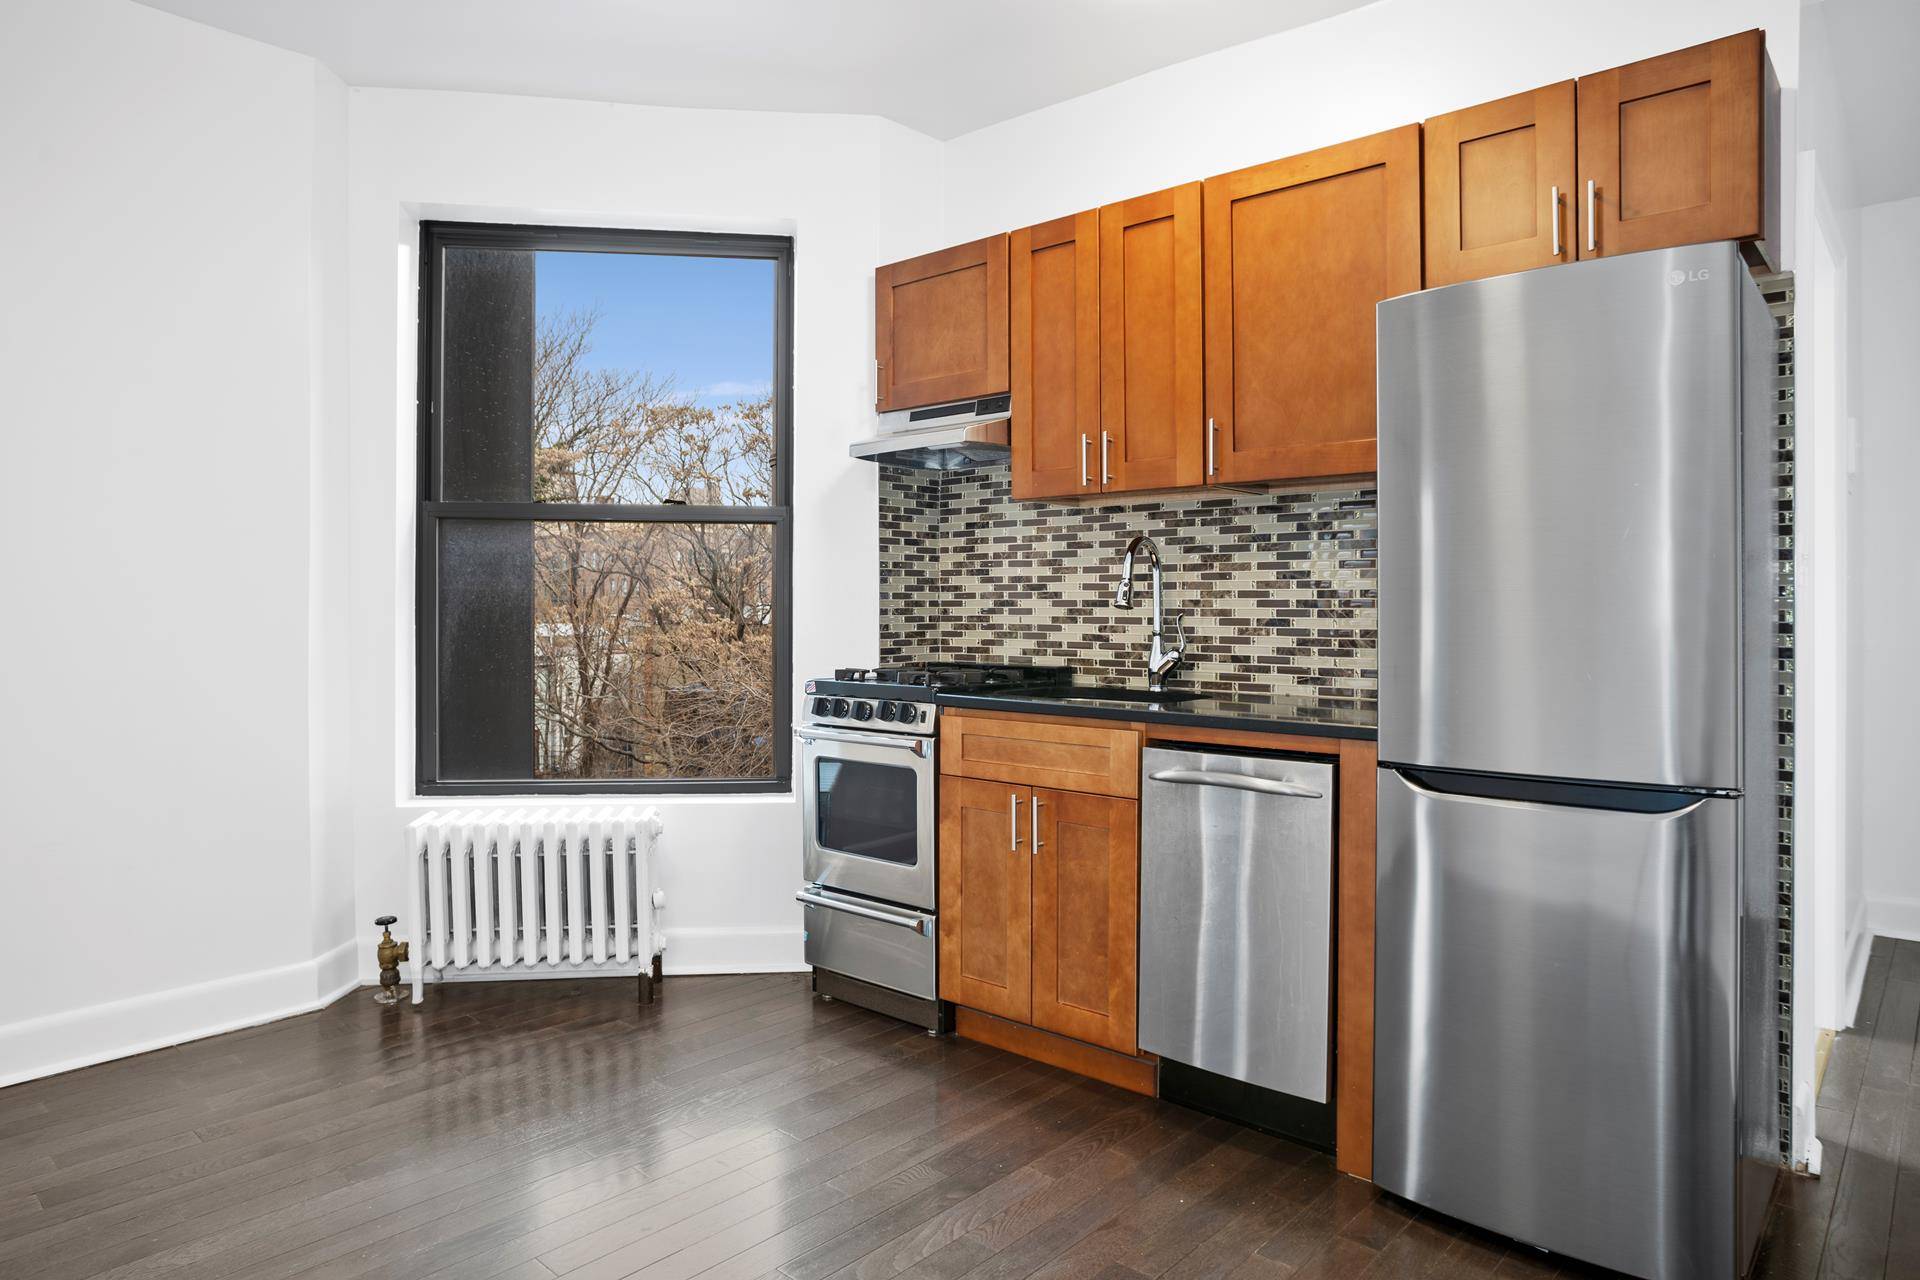 Located on the fifth floor of a walk up building, this is a sunny, renovated two bedroom one bath home, with the bathroom having a window.